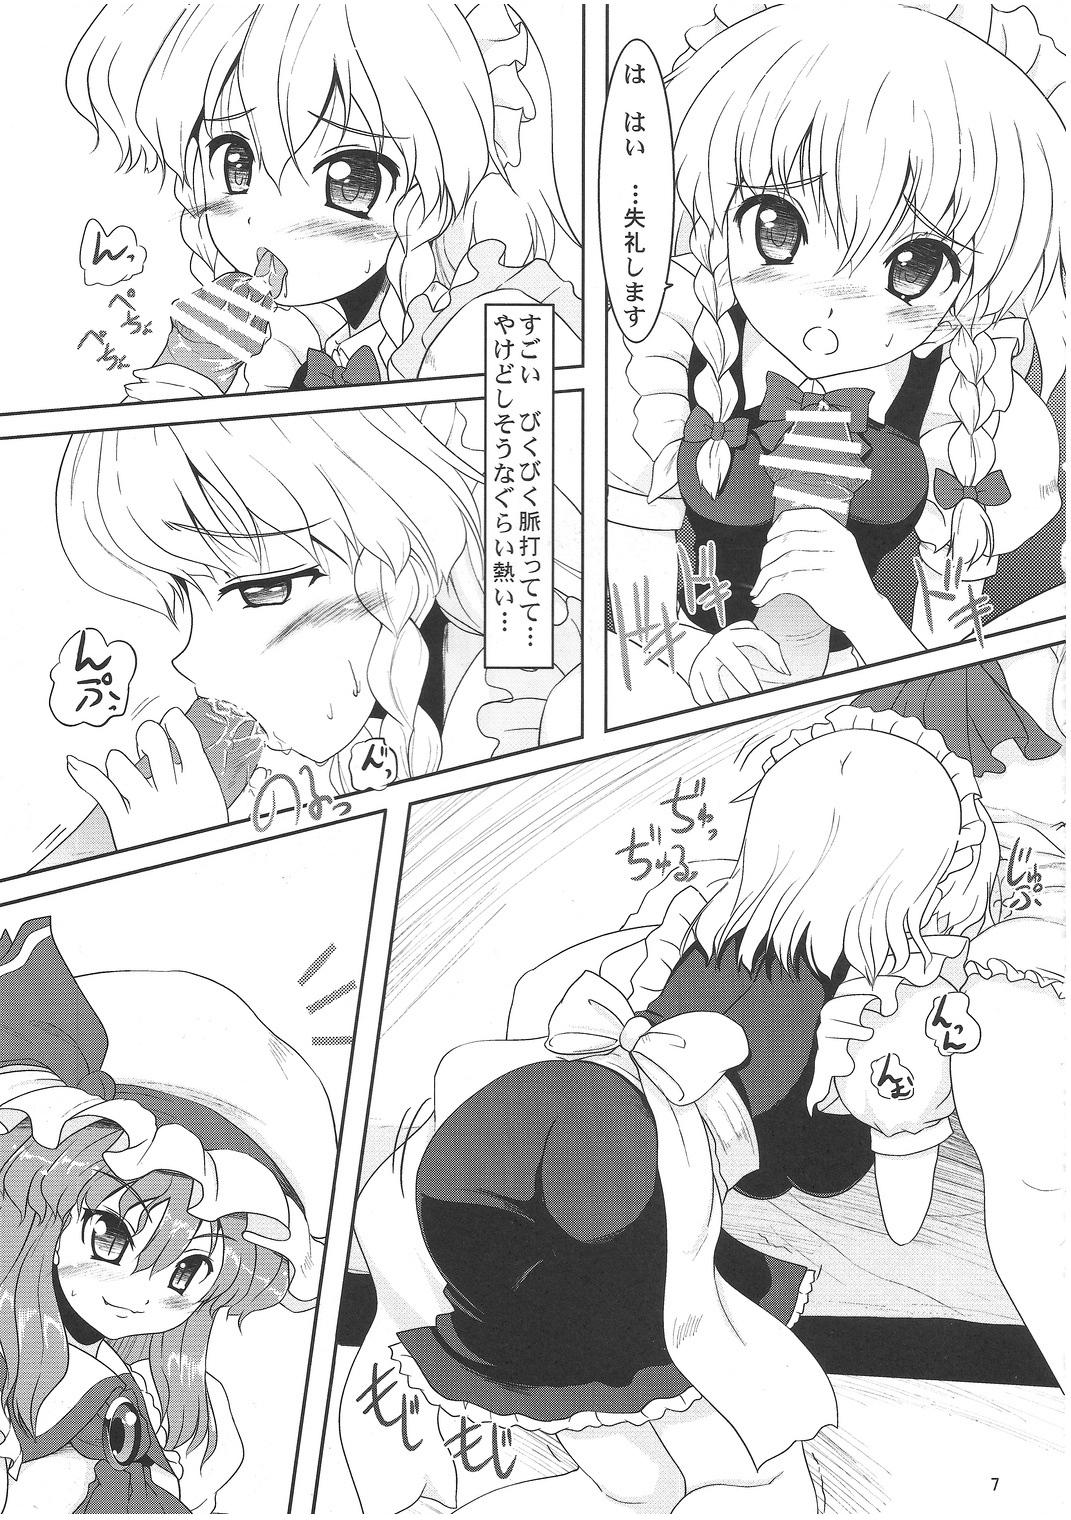 Food Maid or Dog - Touhou project This - Page 6